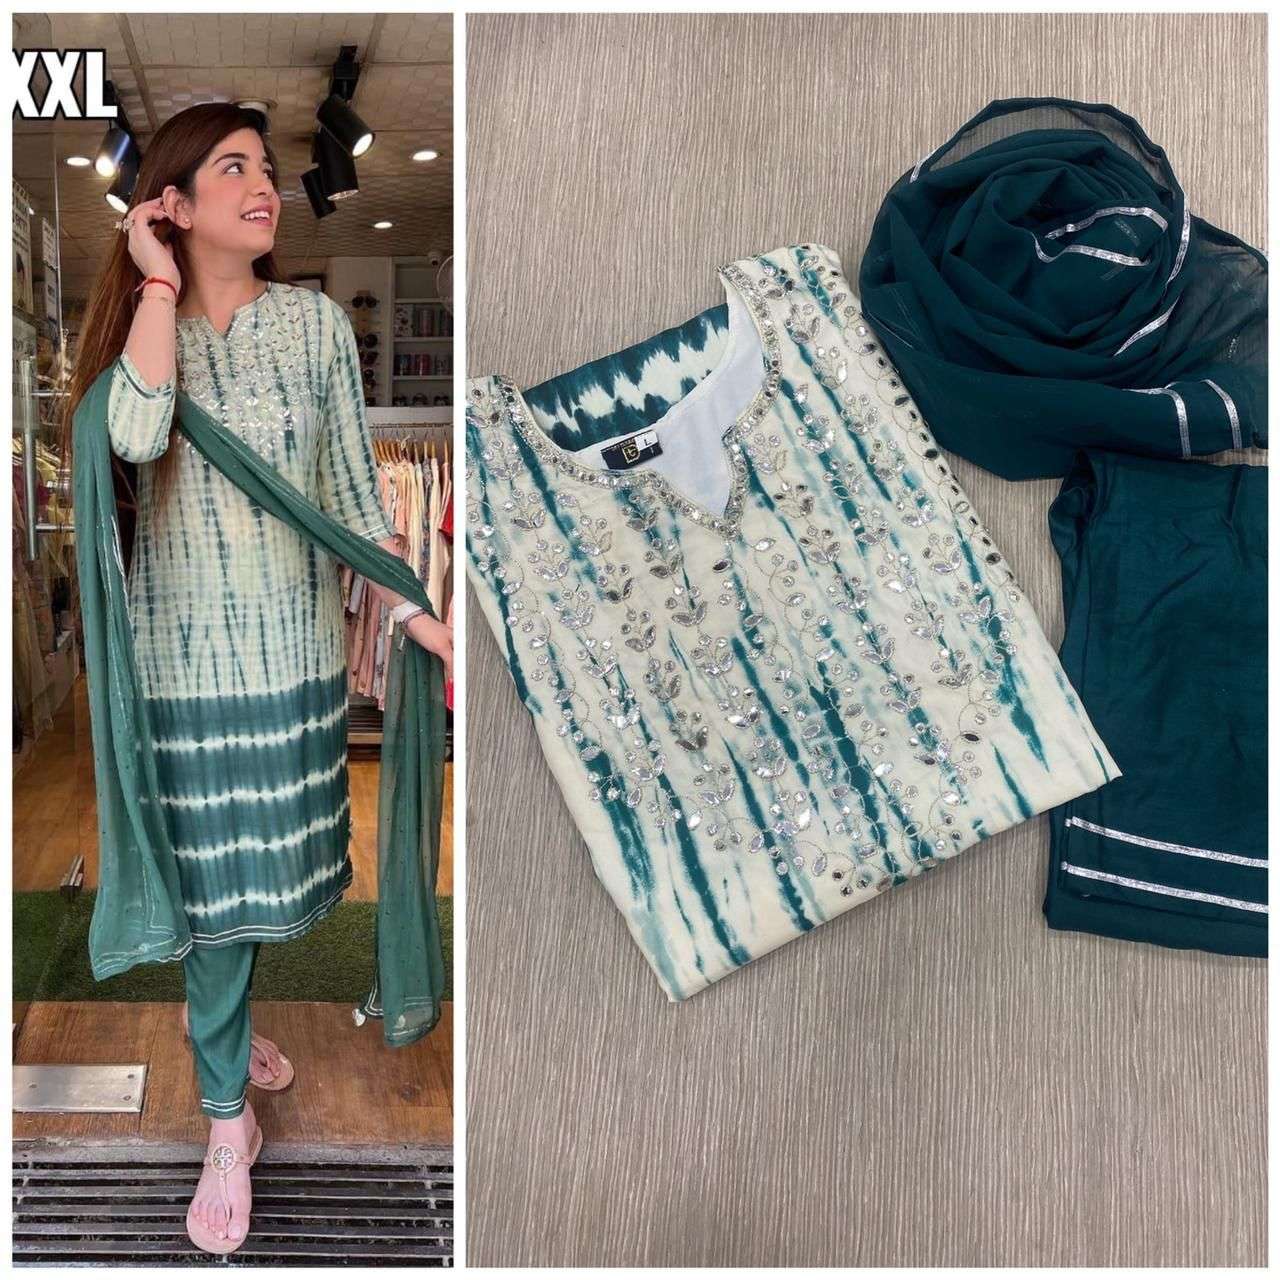 DESIGNER MUSLIN SILK NECK WORK STRAIGHT KURTA WITH RAYON PANT AND GEORGETTE FOUR SIDE LACE DUPATTA HEAVY READYMADE KURTA SETS IN SINGLES 